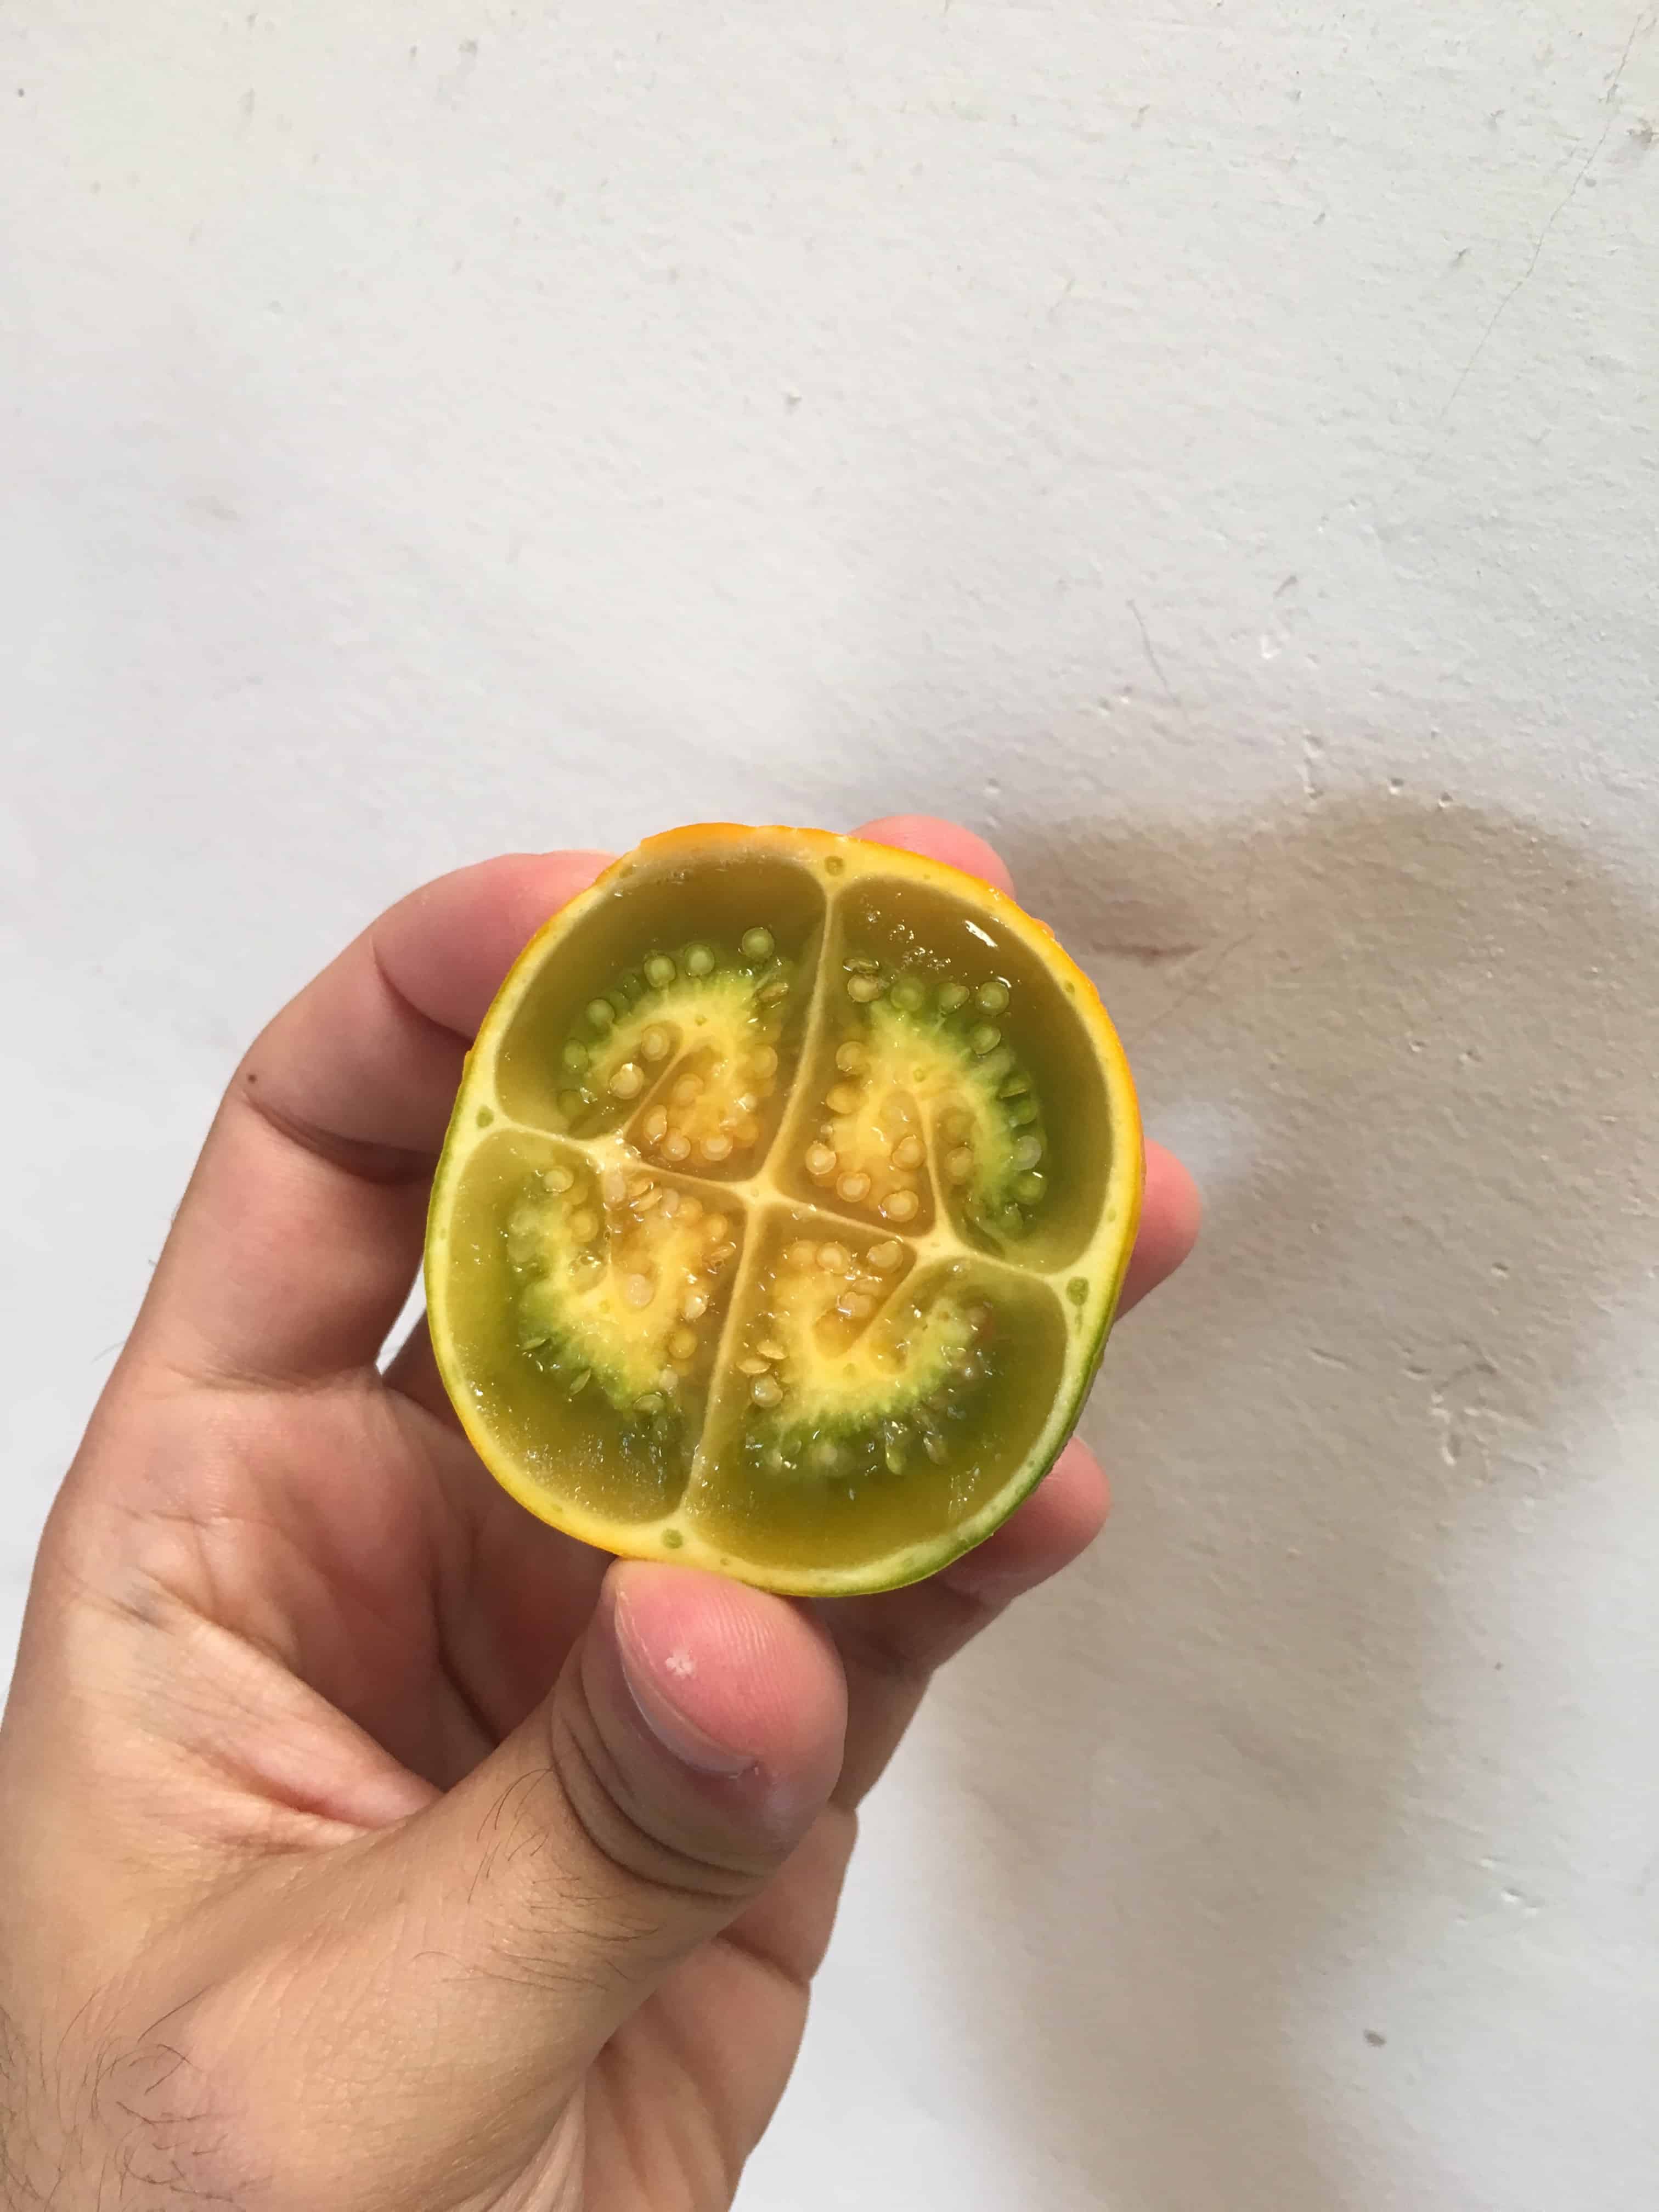 Lulo Fruit in Colombia